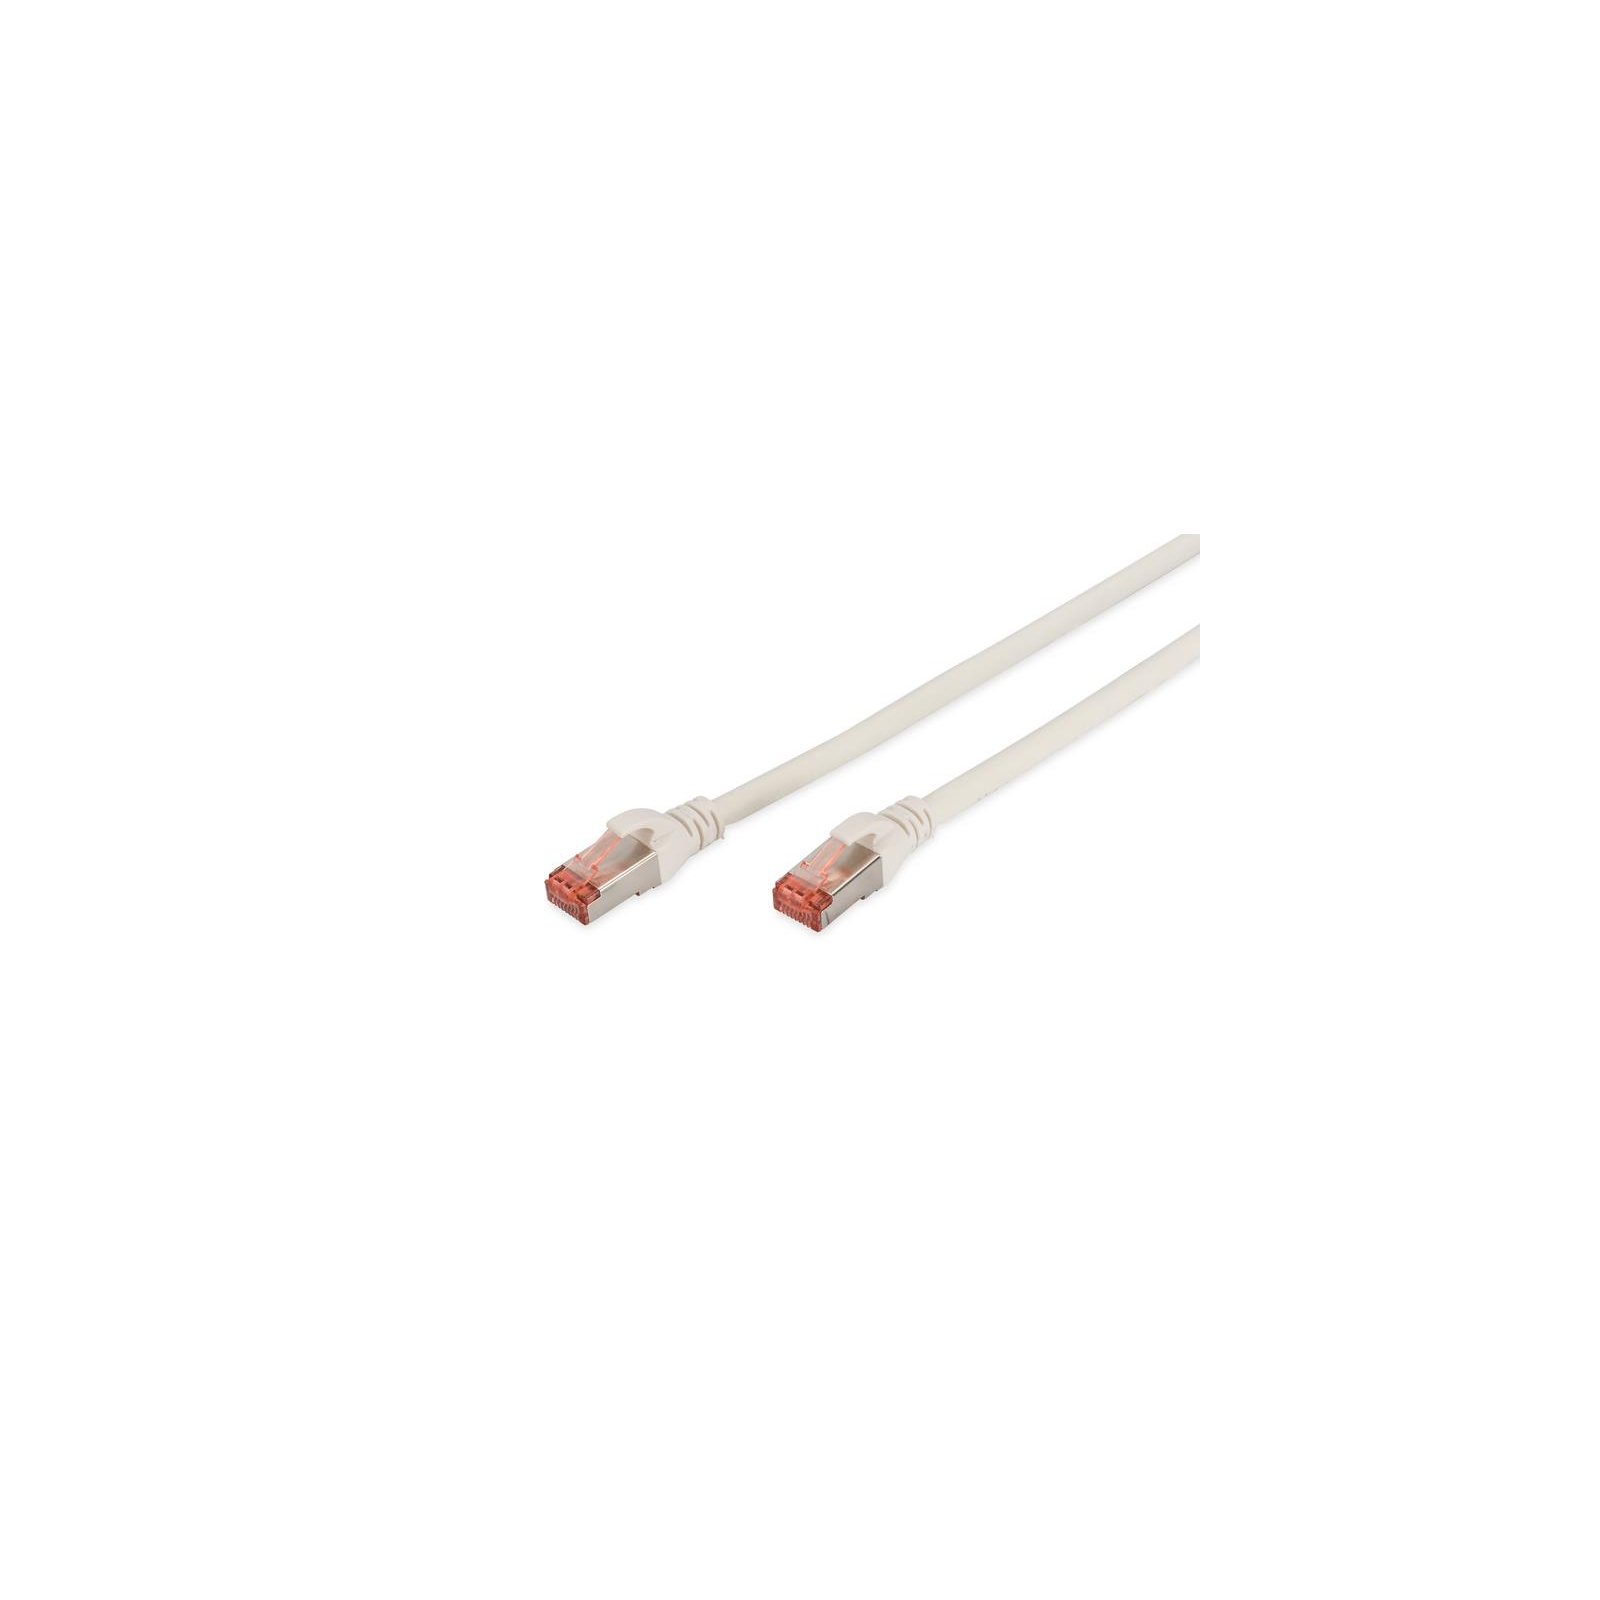 Патч-корд 2м, CAT 6 S-FTP, AWG 27/7, LSZH, white Digitus (DK-1644-020/WH)